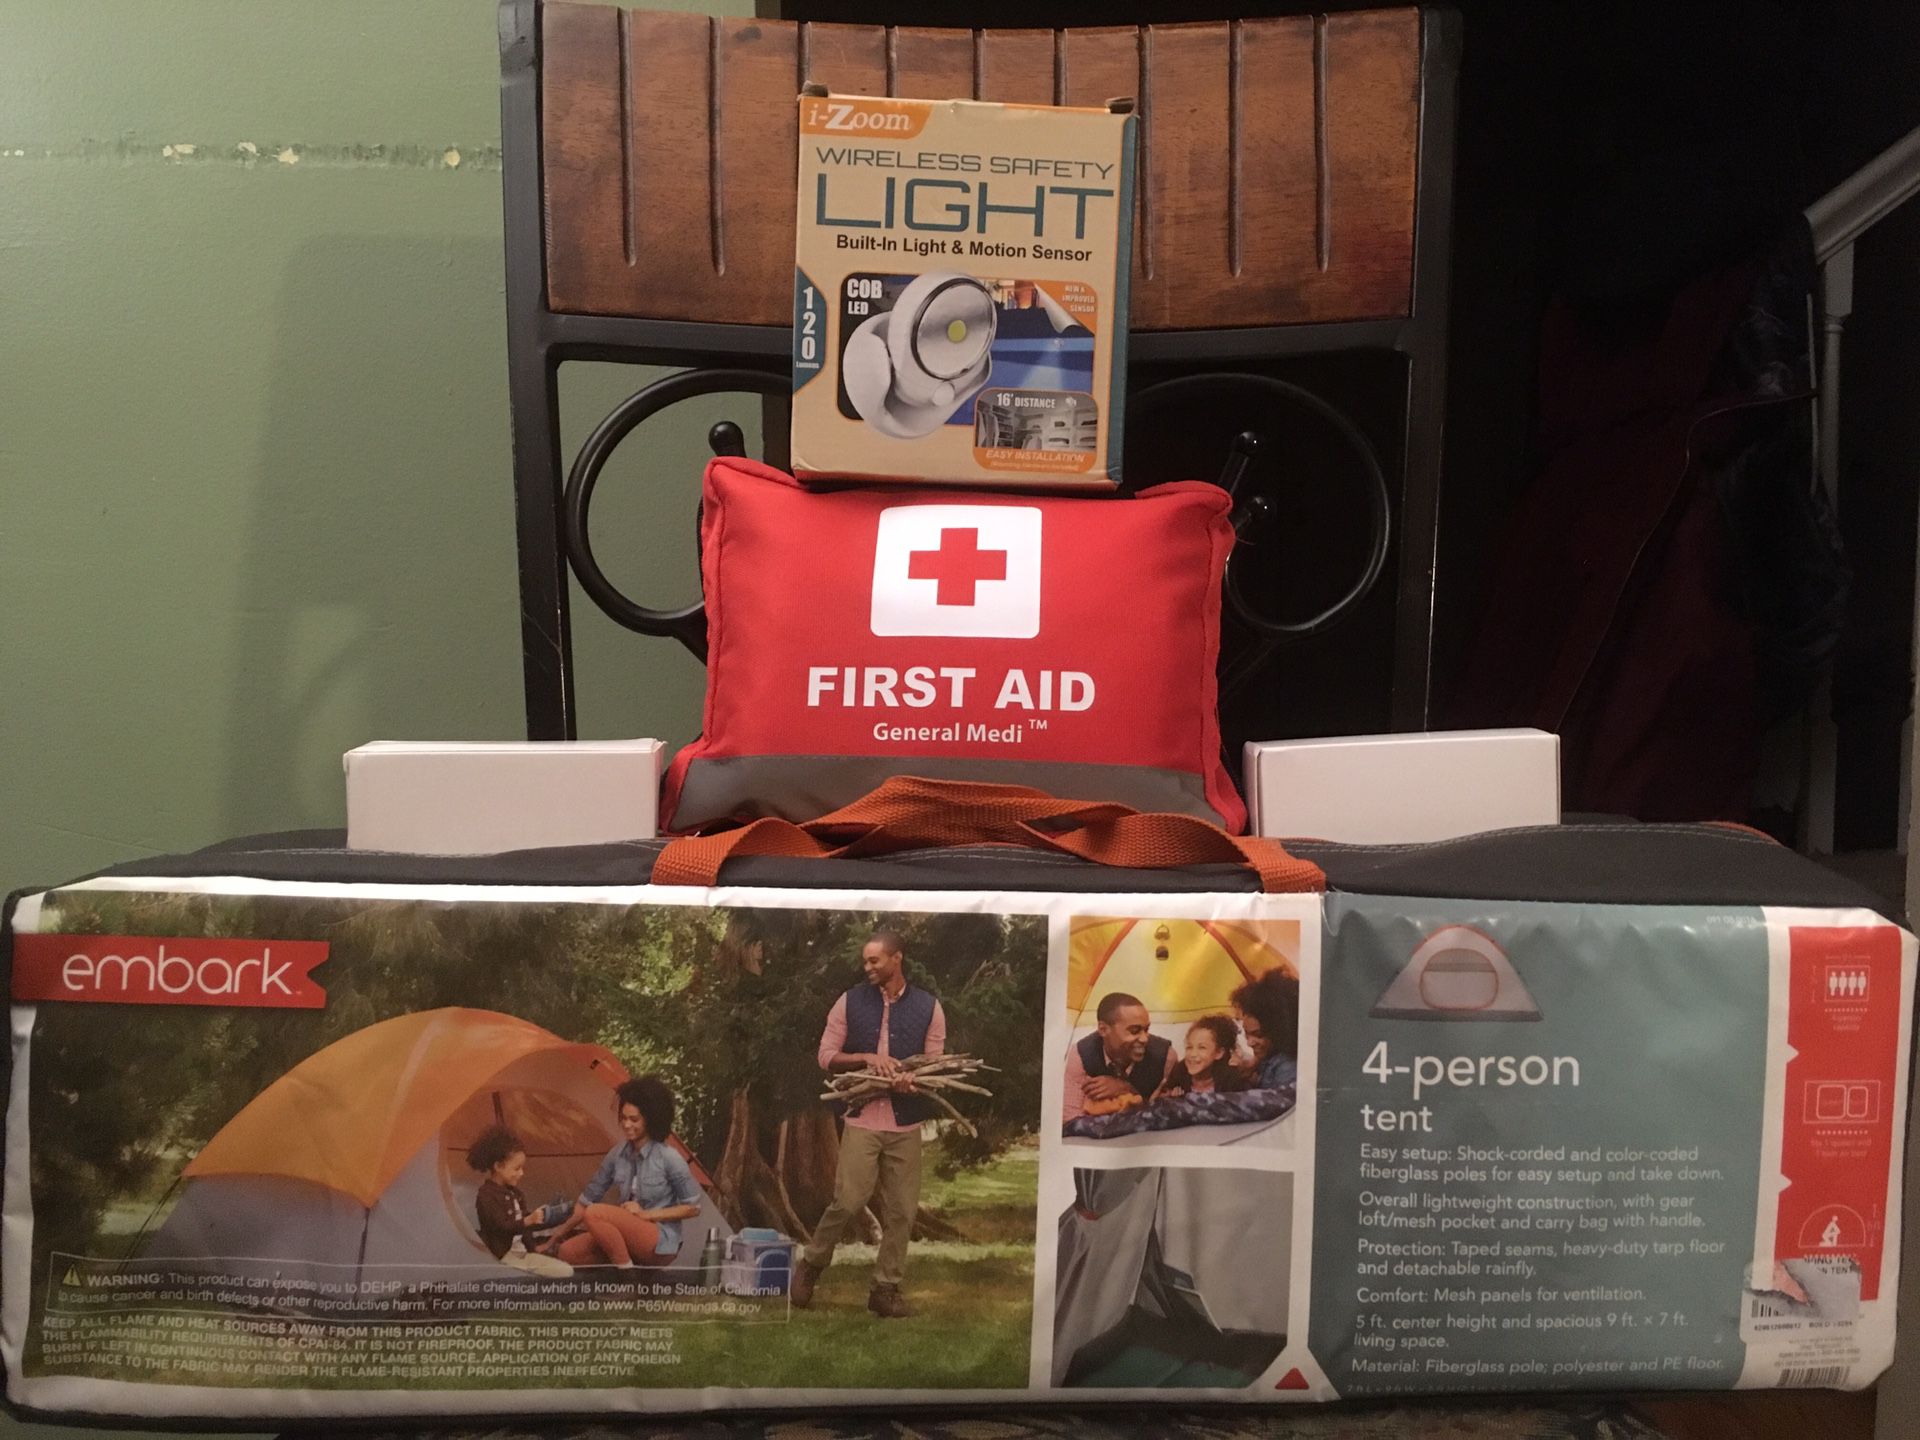 4 Person Tent w/ Emergency Items: 1 Tent, 1 Completely Wireless Motion Sensor Safety Light, 1/ 309 pc. First Aid Kit & 2 Emergency Cell Phone Chargers